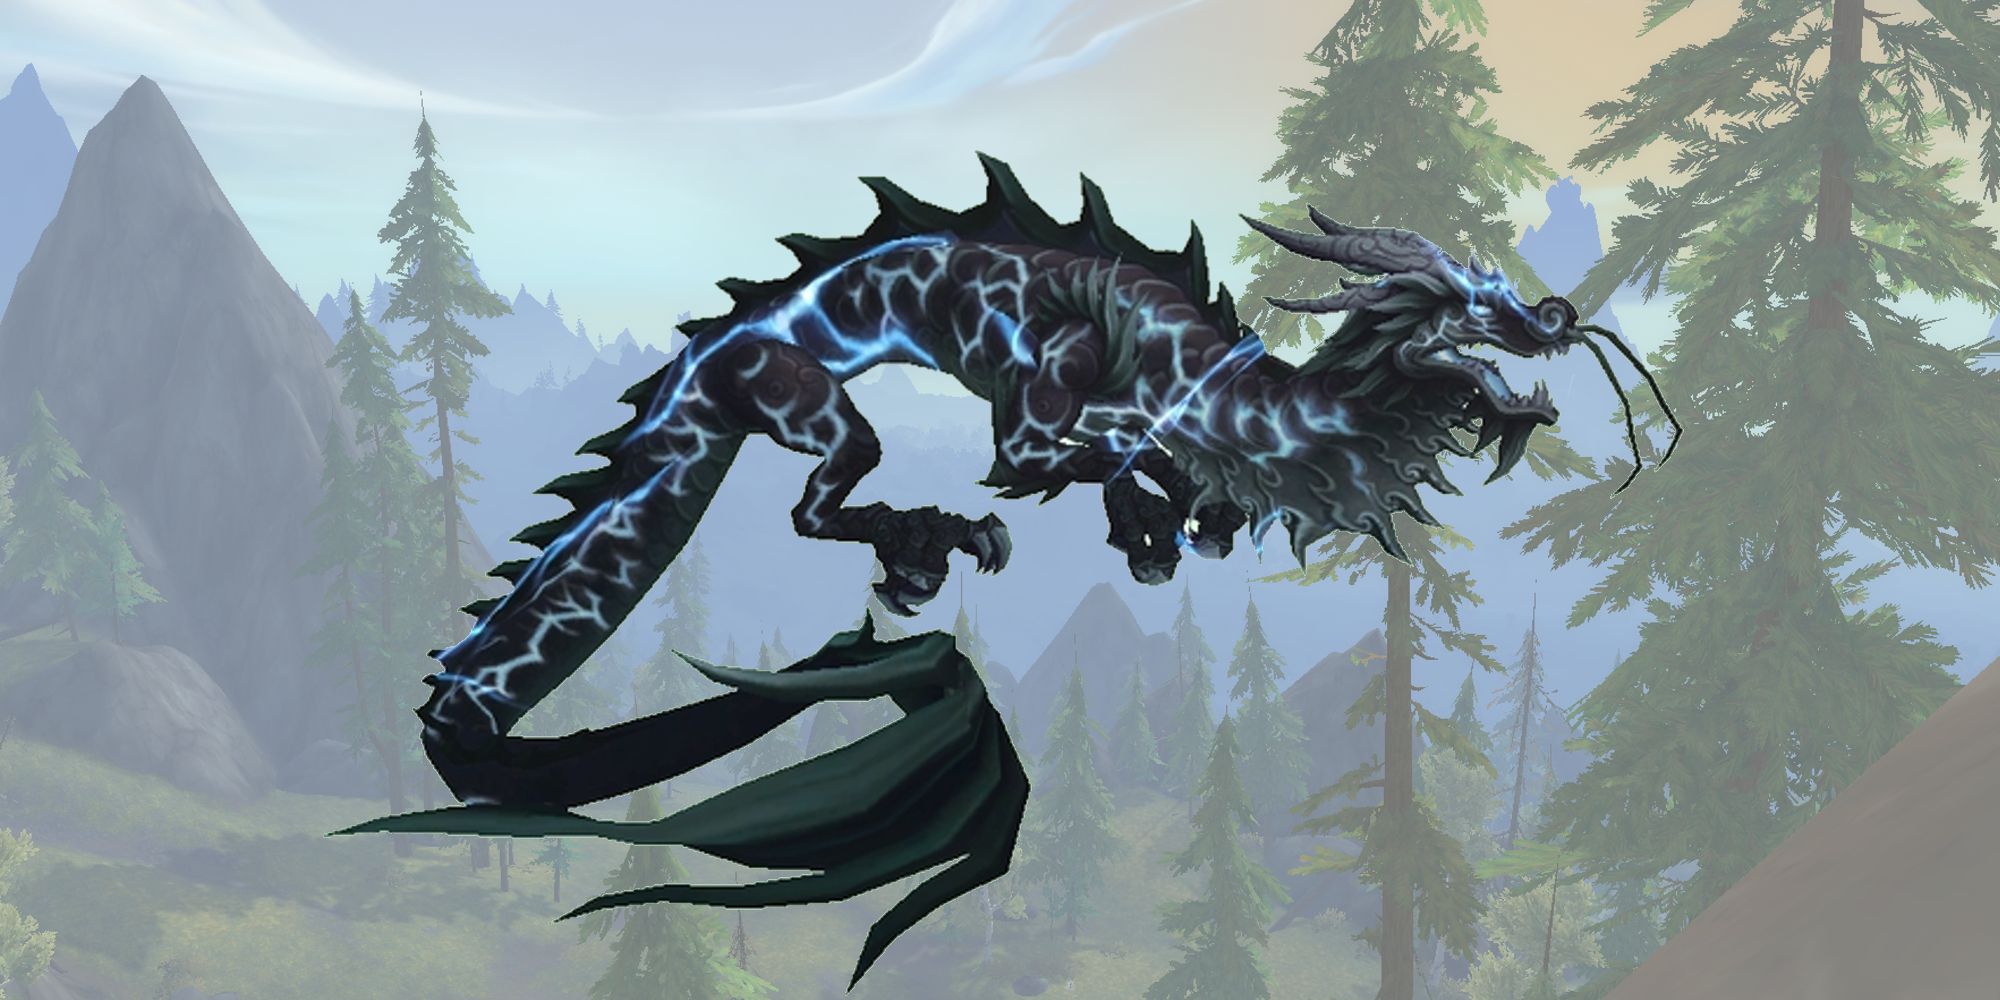 Thundering Black Cloud Serpent as seen in World of Warcraft Dragonflight